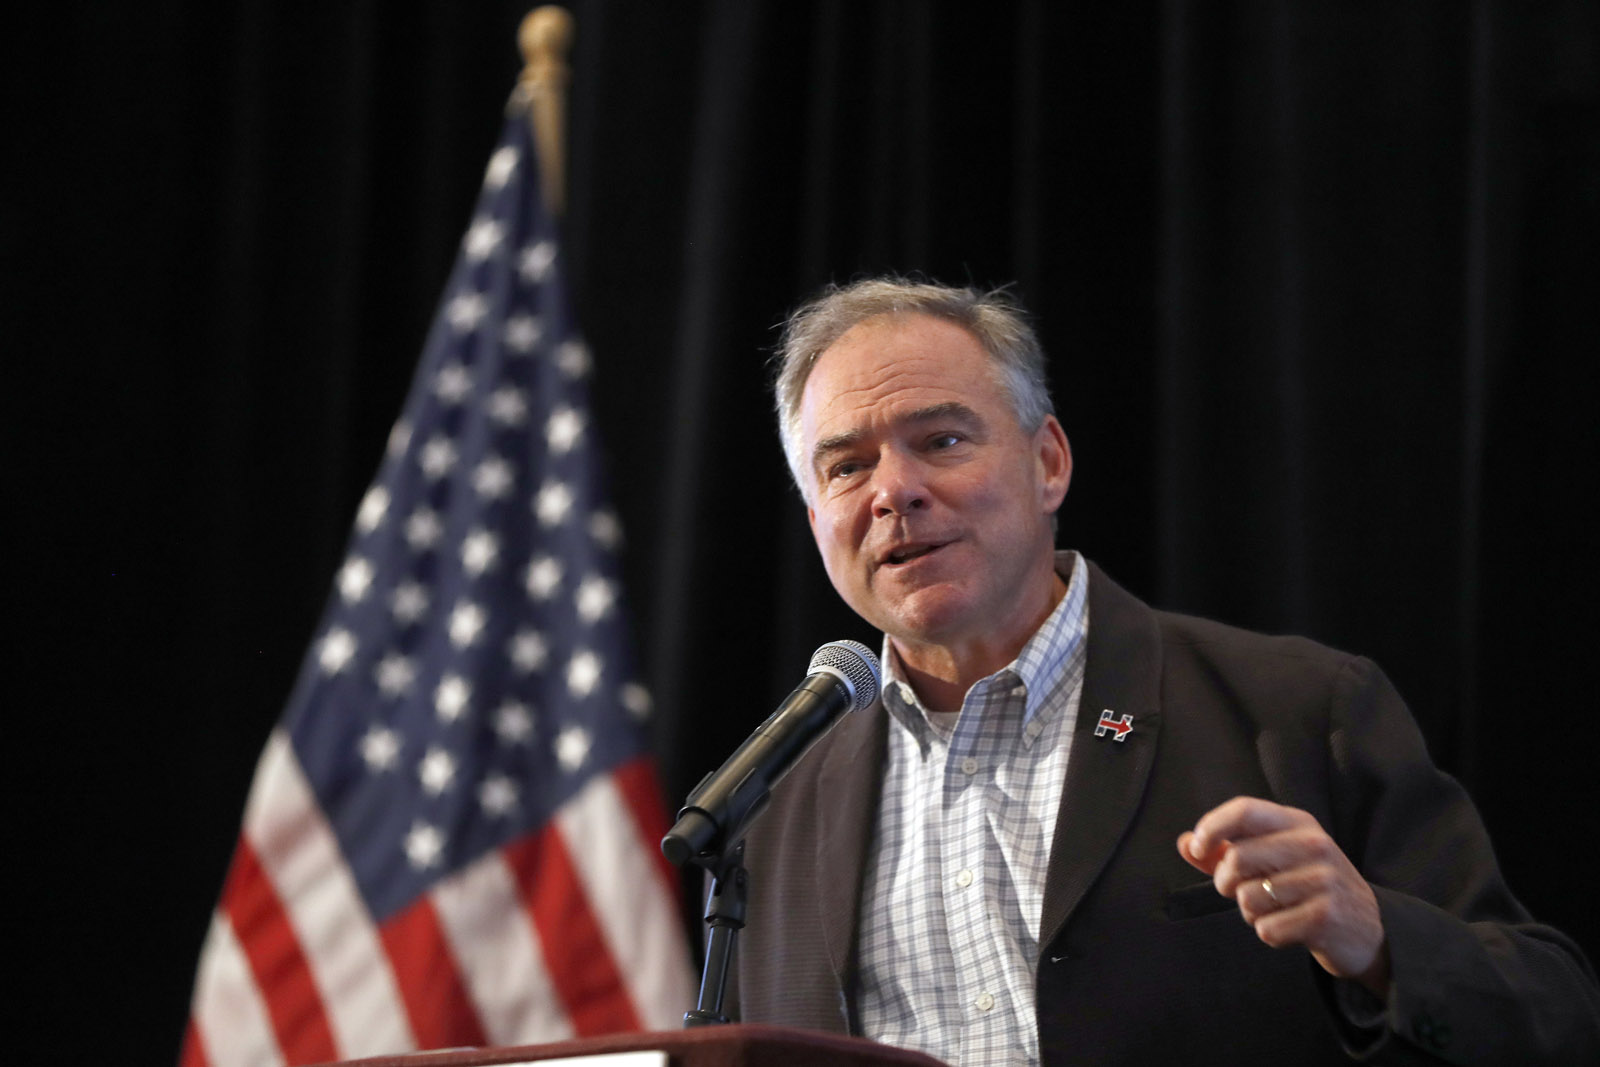 Democratic Vice Presidential candidate, Sen. Tim Kaine, D-Va., speaks during a breakfast for the Virginia delegates, Wednesday, July 27, 2016, in Philadelphia. (AP Photo/Mary Altaffer)